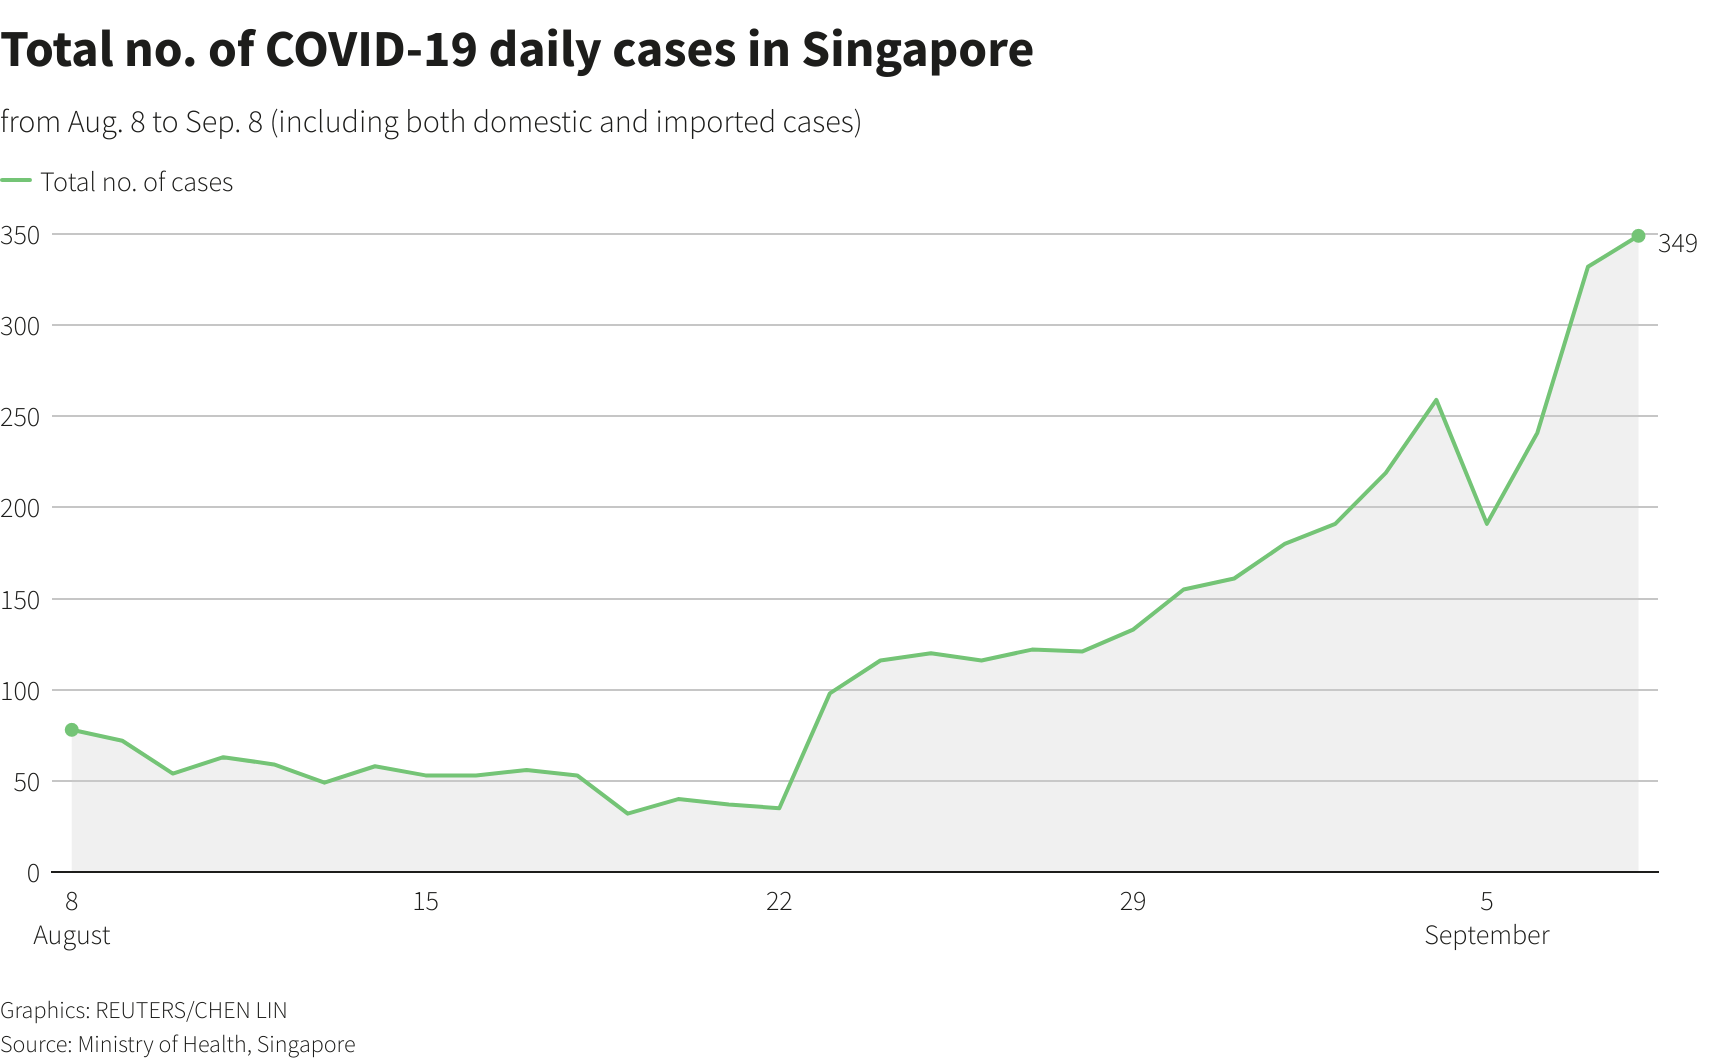 Total no. of COVID-19 daily cases in Singapore